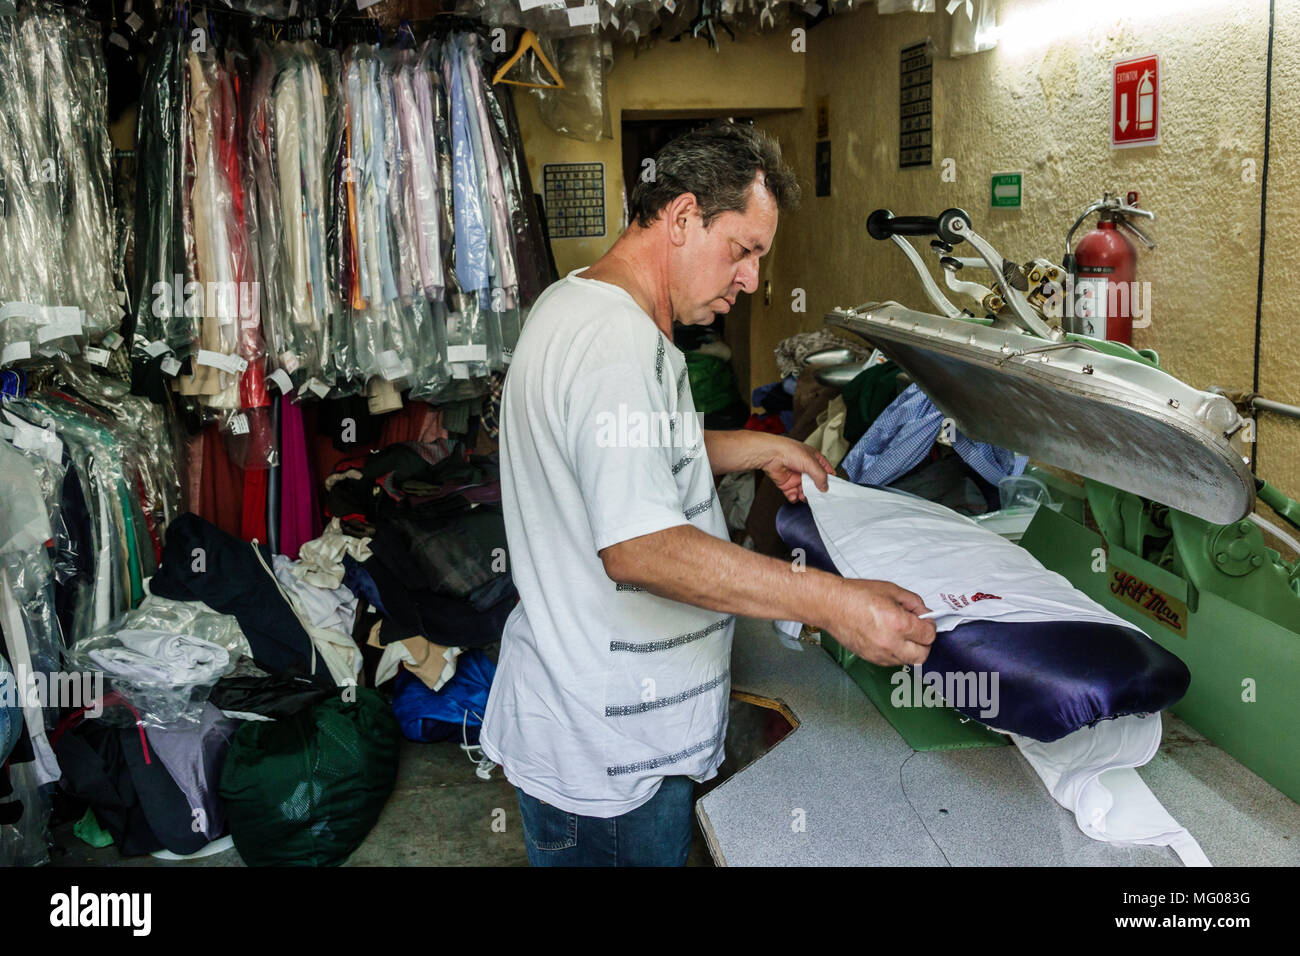 Mexico City,Cuauhtemoc,Mexican,Hispanic,historic Center Centre,Calle Regina,dry cleaner cleaning,man men male,working,pressing,ironing,manager,employe Stock Photo